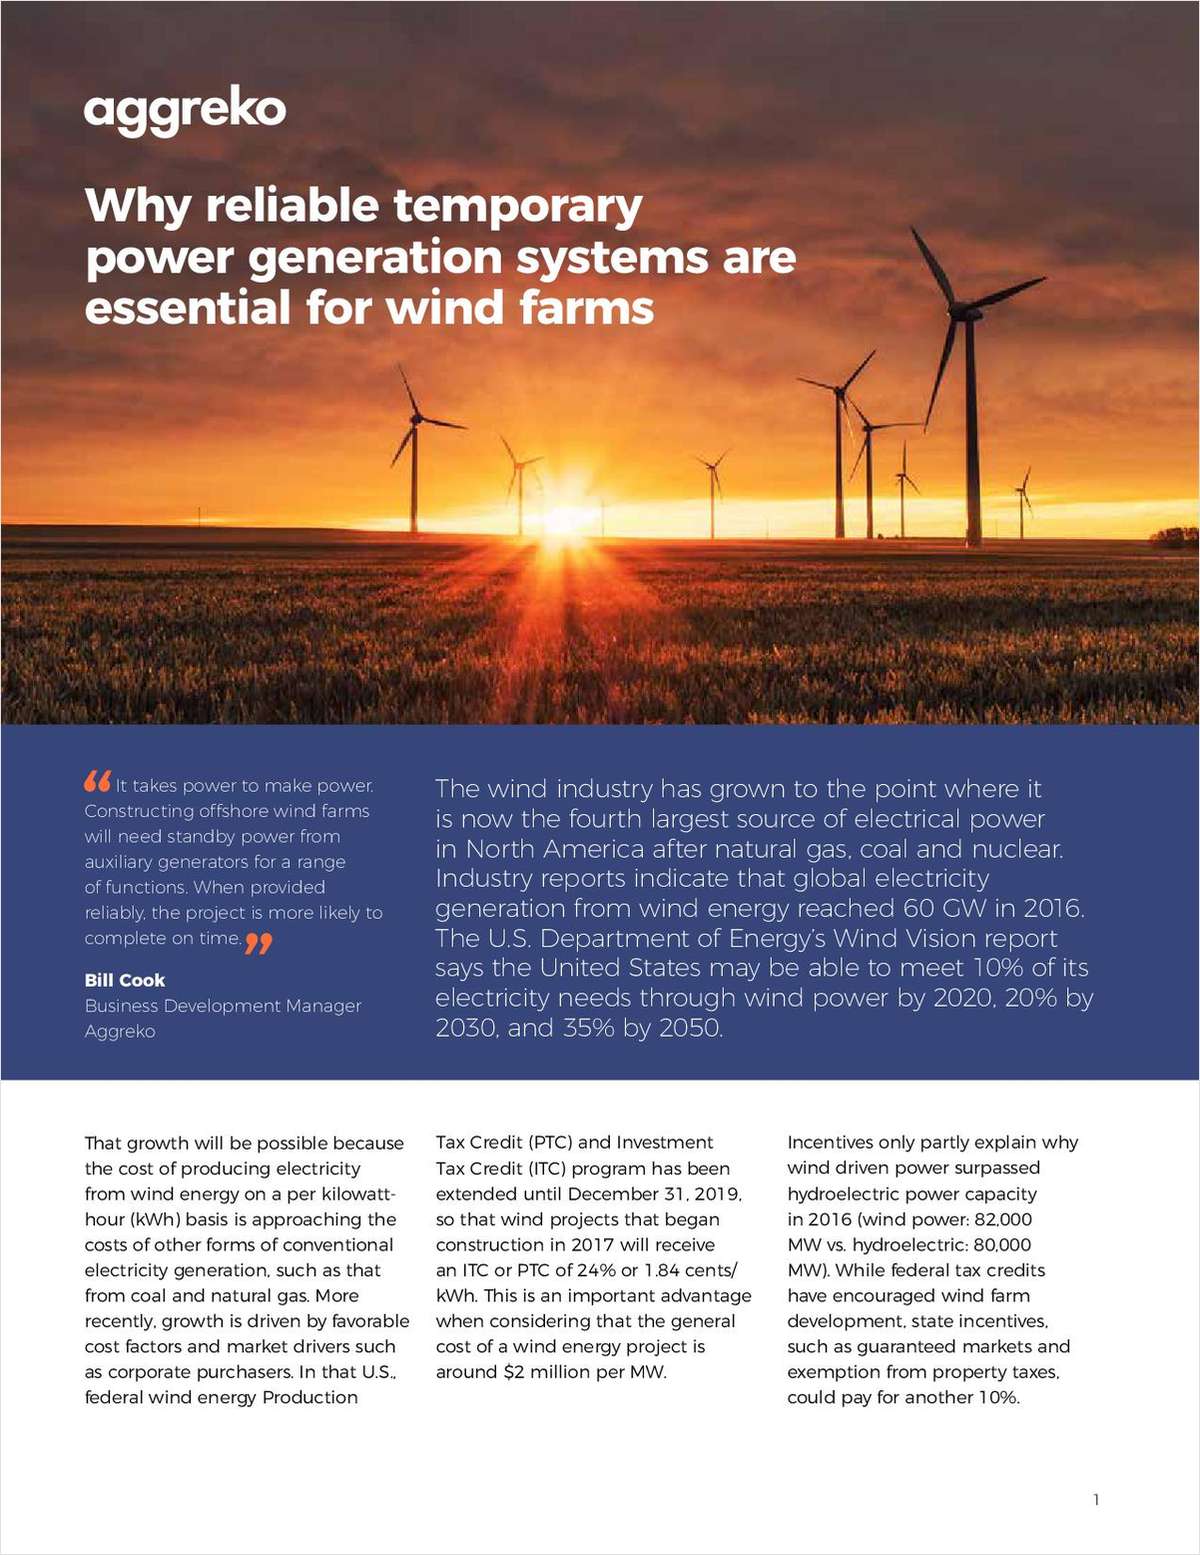 Why reliable temporary power generation systems are essential for wind farms